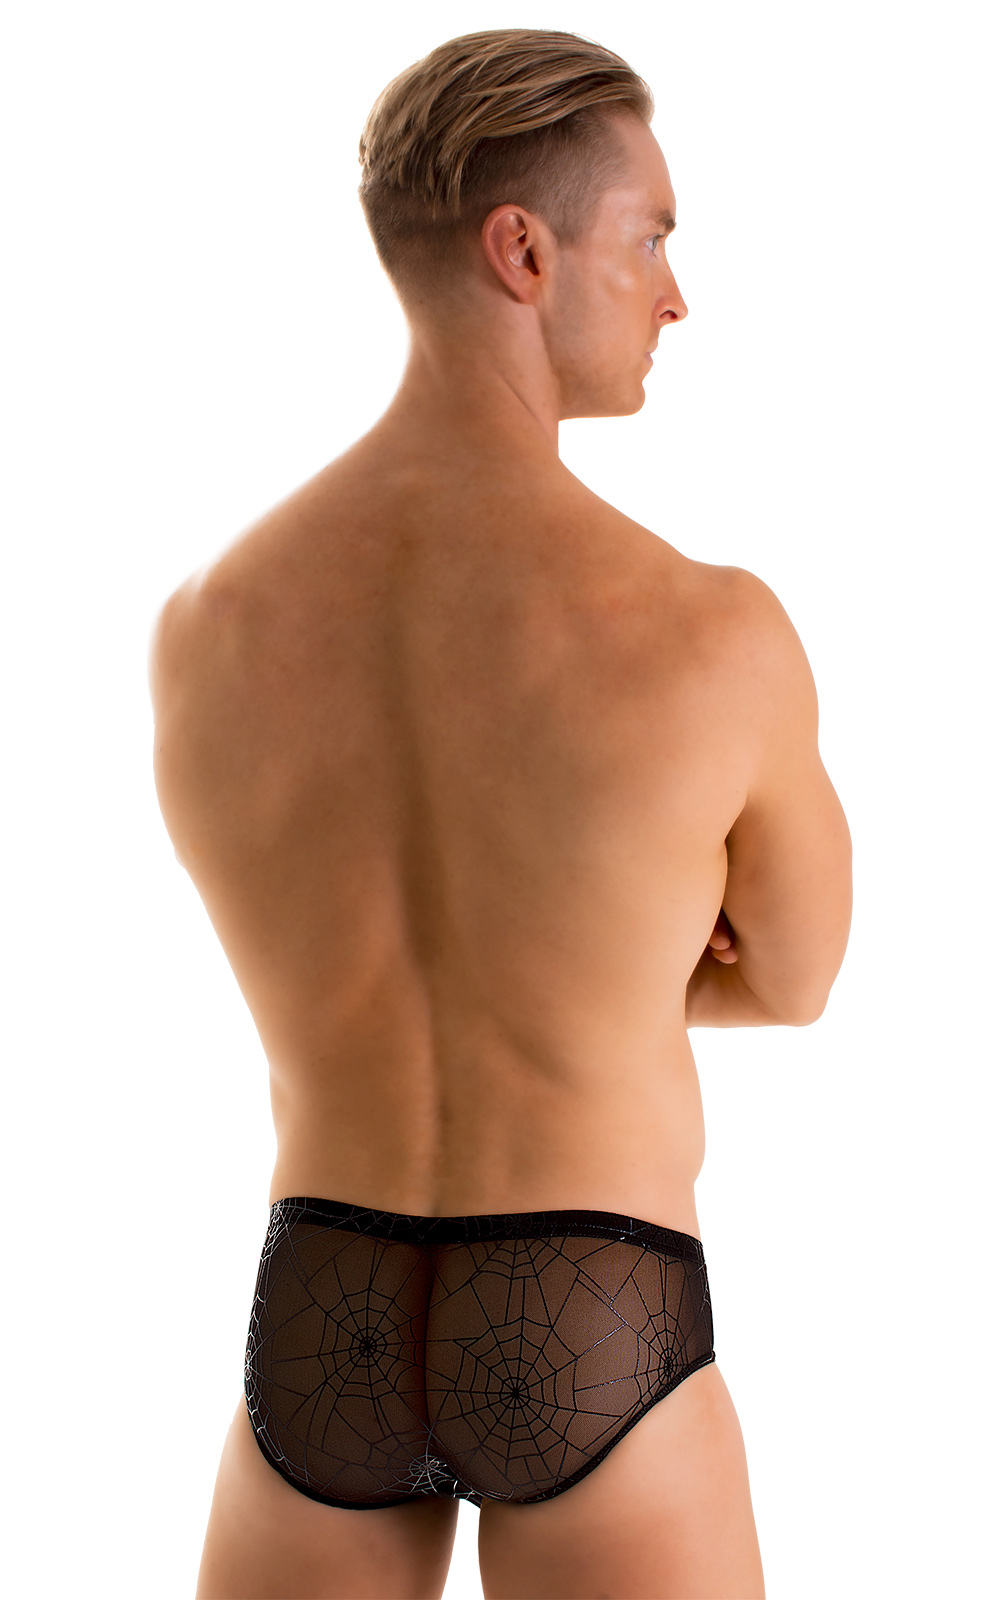 Pouch Brief Swimsuit in Black with Semi Sheer Spiderweb Mesh, Rear View